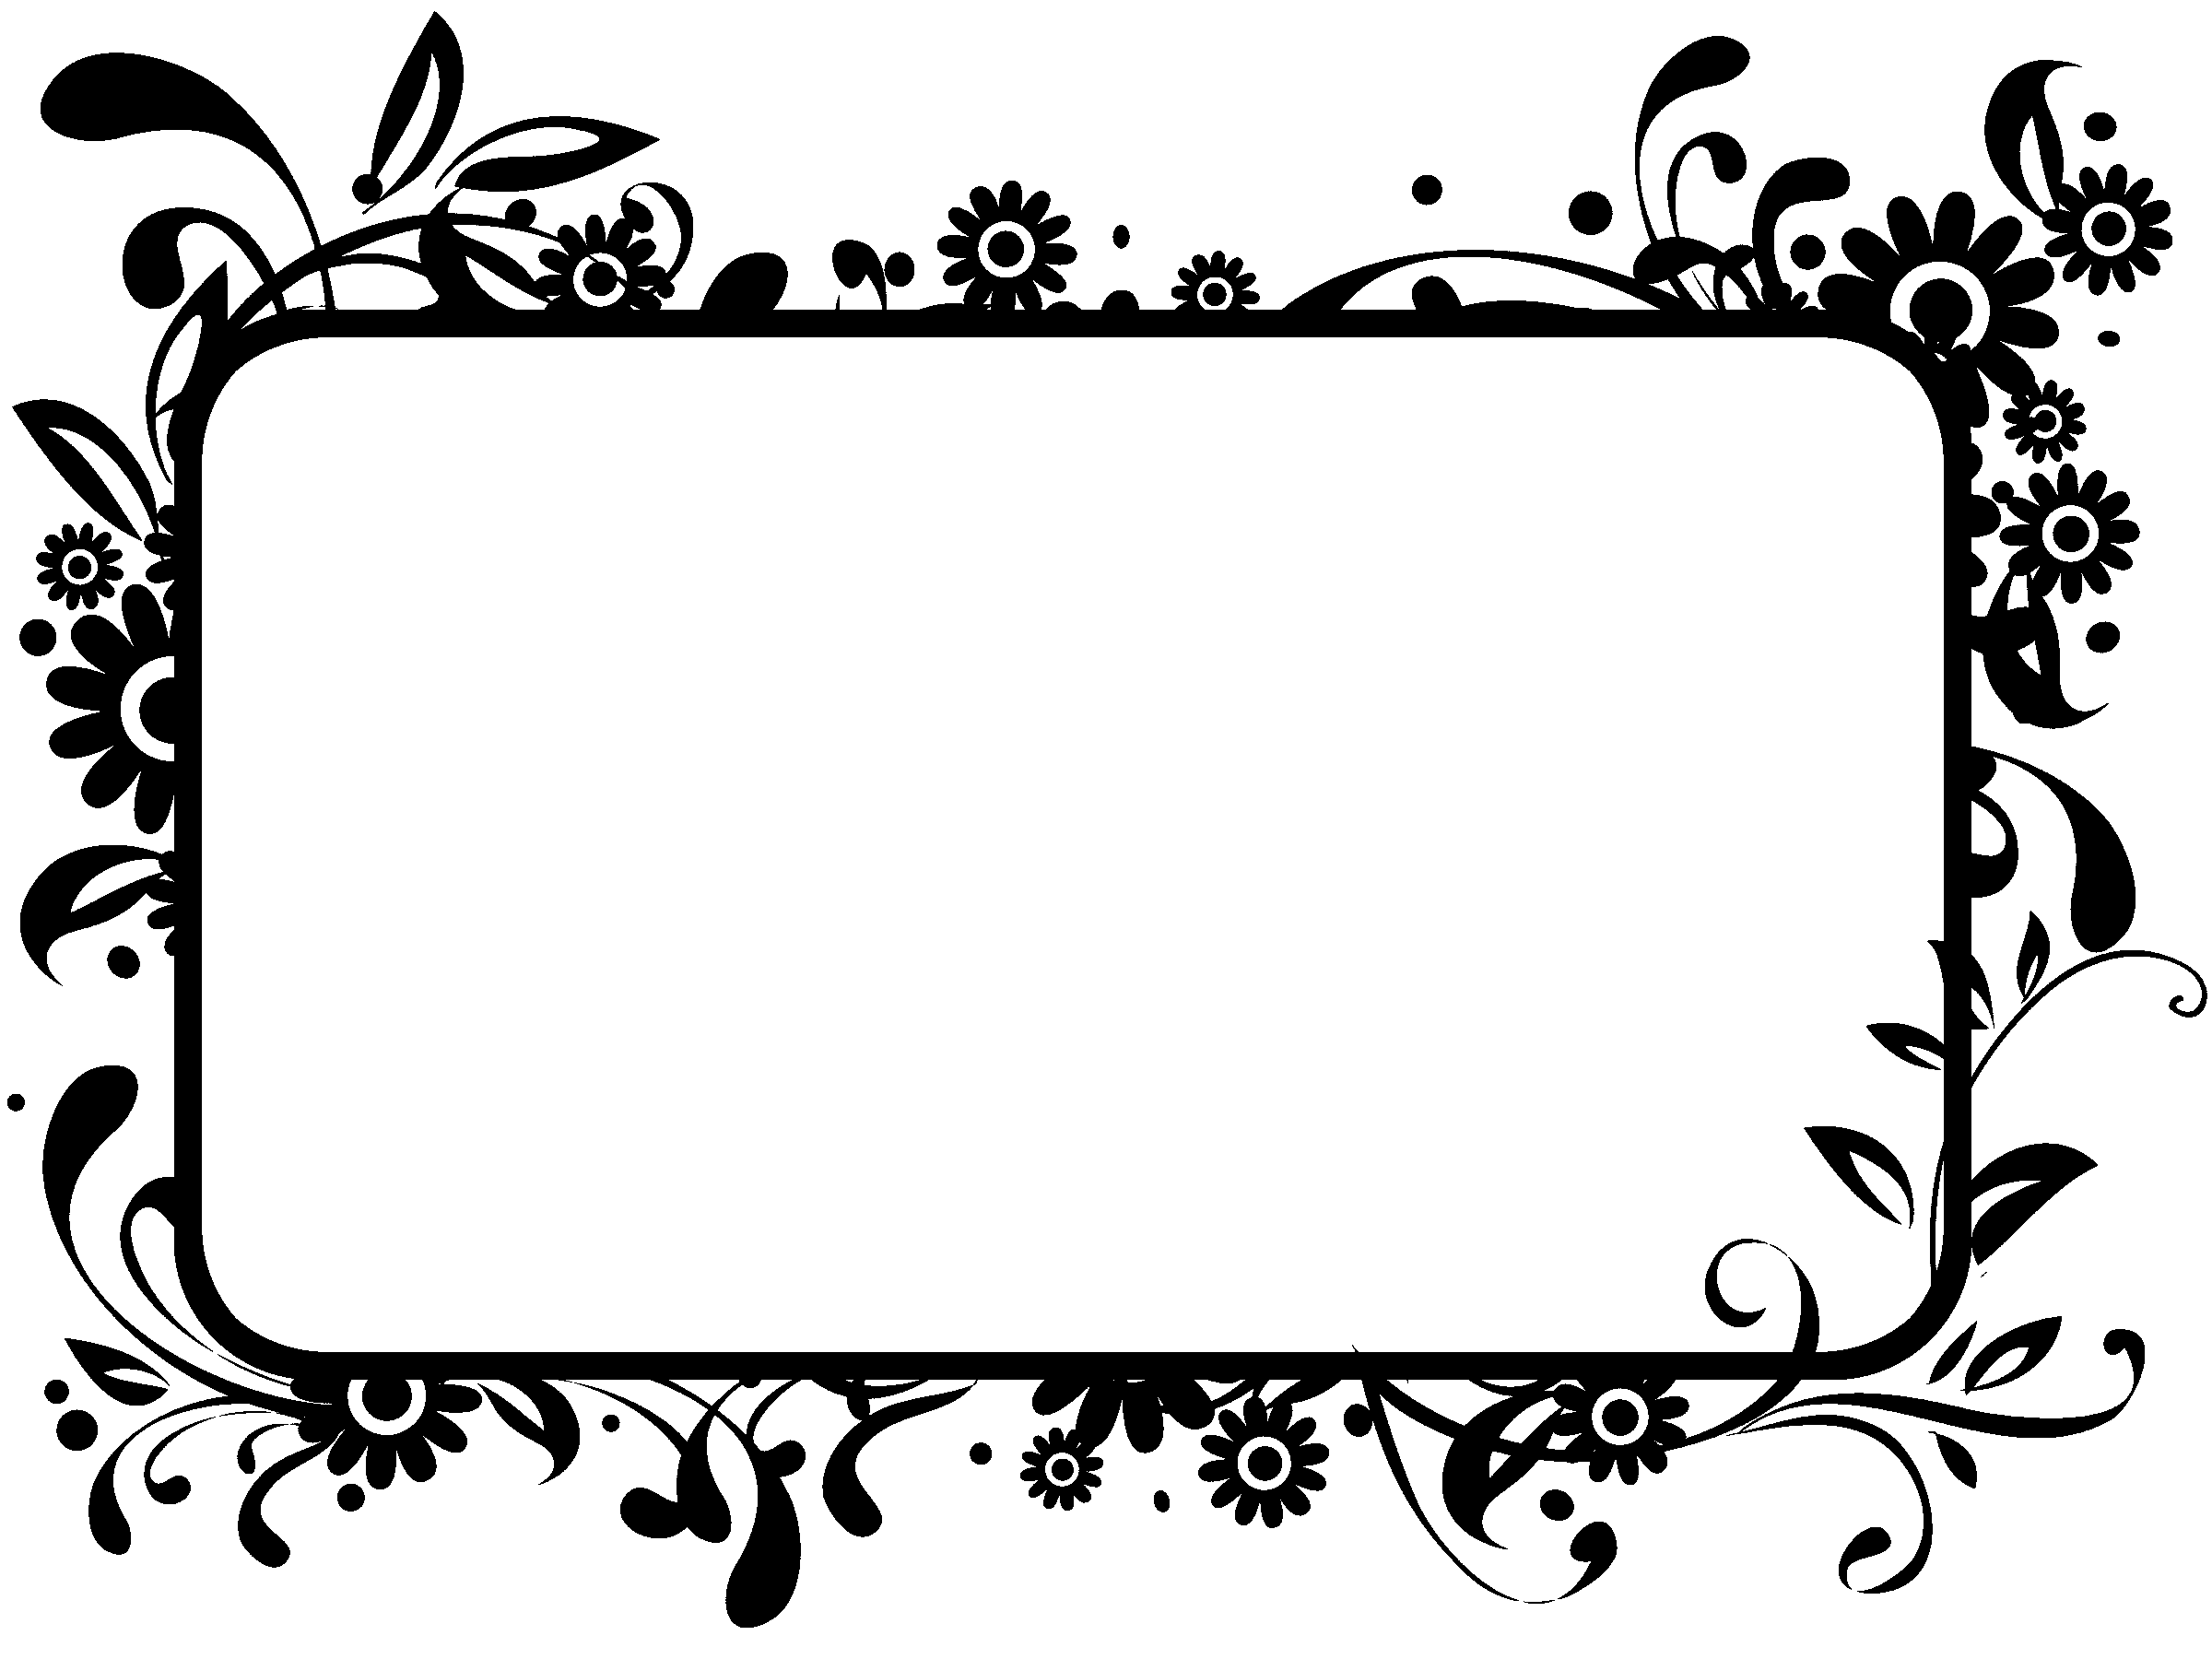 Border clipart png. Swirl copy paste the